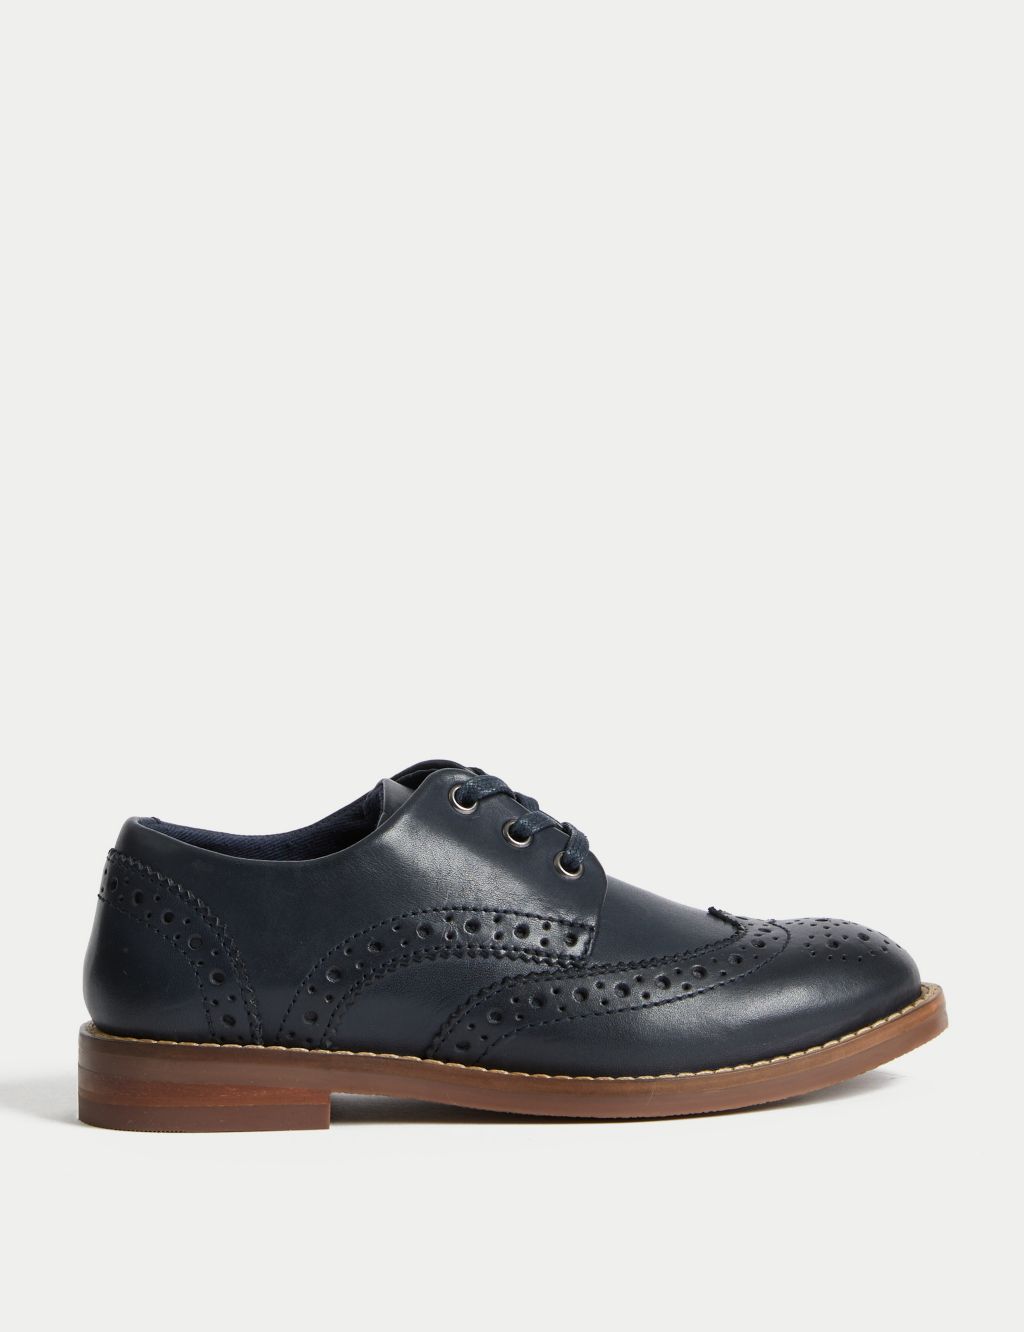 Kids' Leather Brogues (8 Smal l - 2 Large) image 1